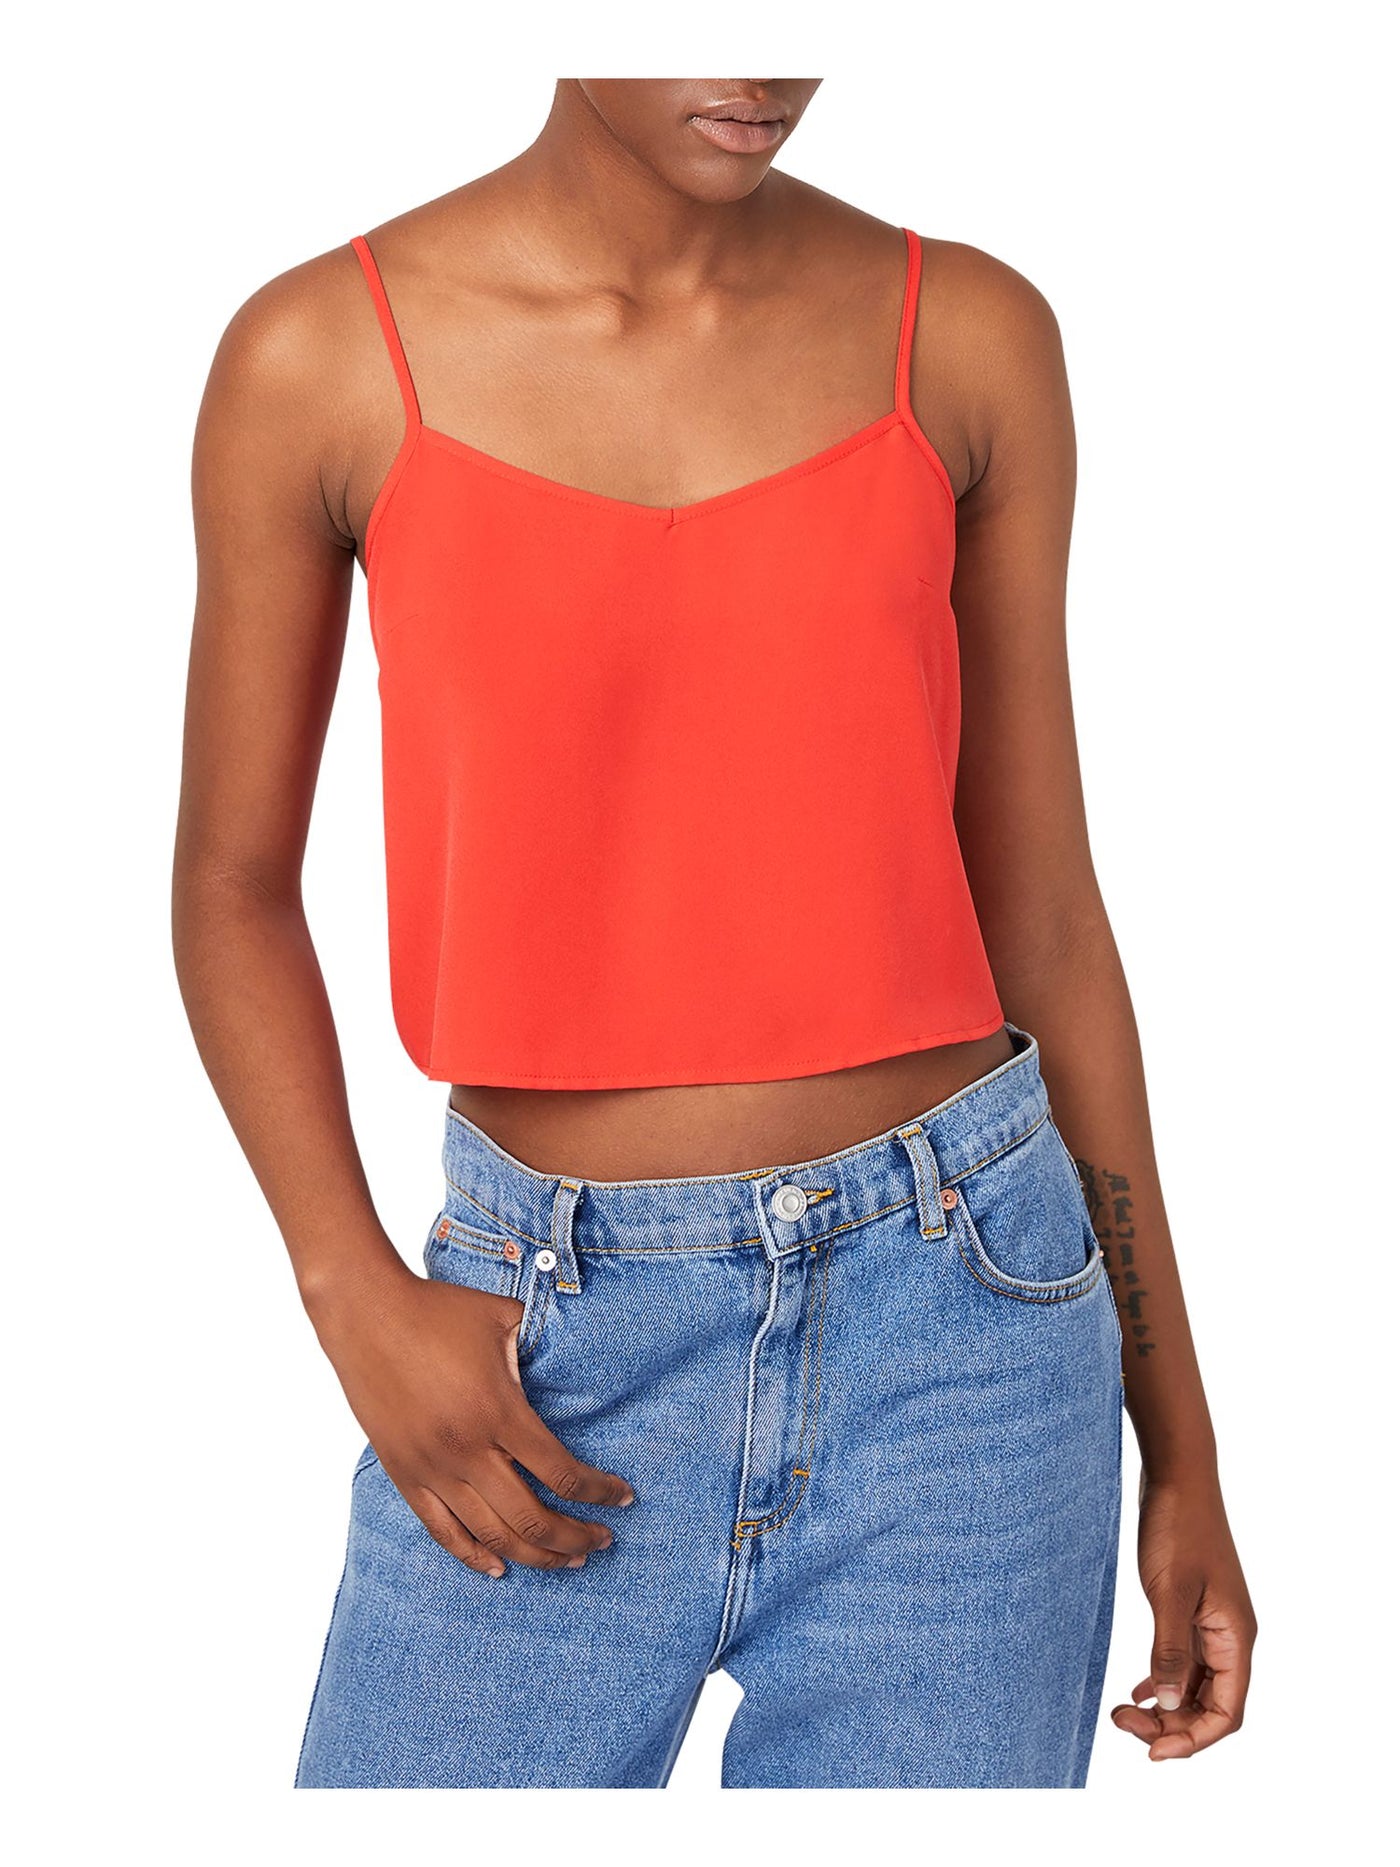 FRENCH CONNECTION Womens Coral Spaghetti Strap V Neck Crop Top L